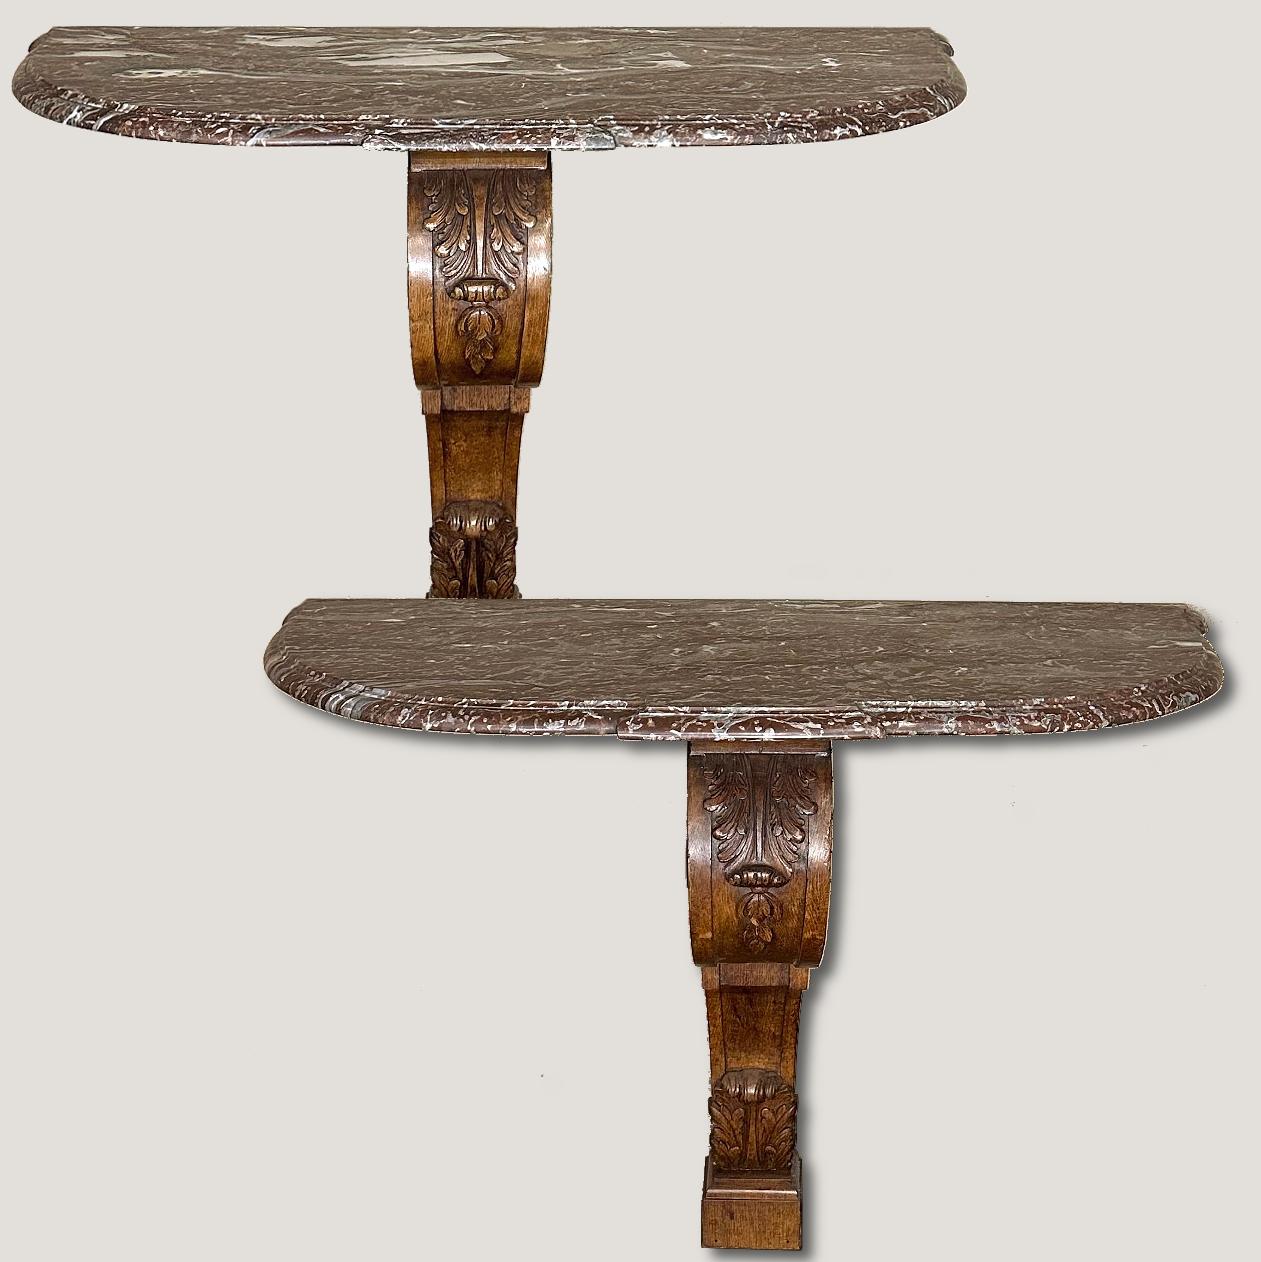 19th Century French Louis XIV Walnut Marble Top Console is a truly rare find!  Sculpted from solid French walnut, it displays the classically inspired architecture with Baroque-influenced embellishment that is the hallmark of the Louis XIV genre. 